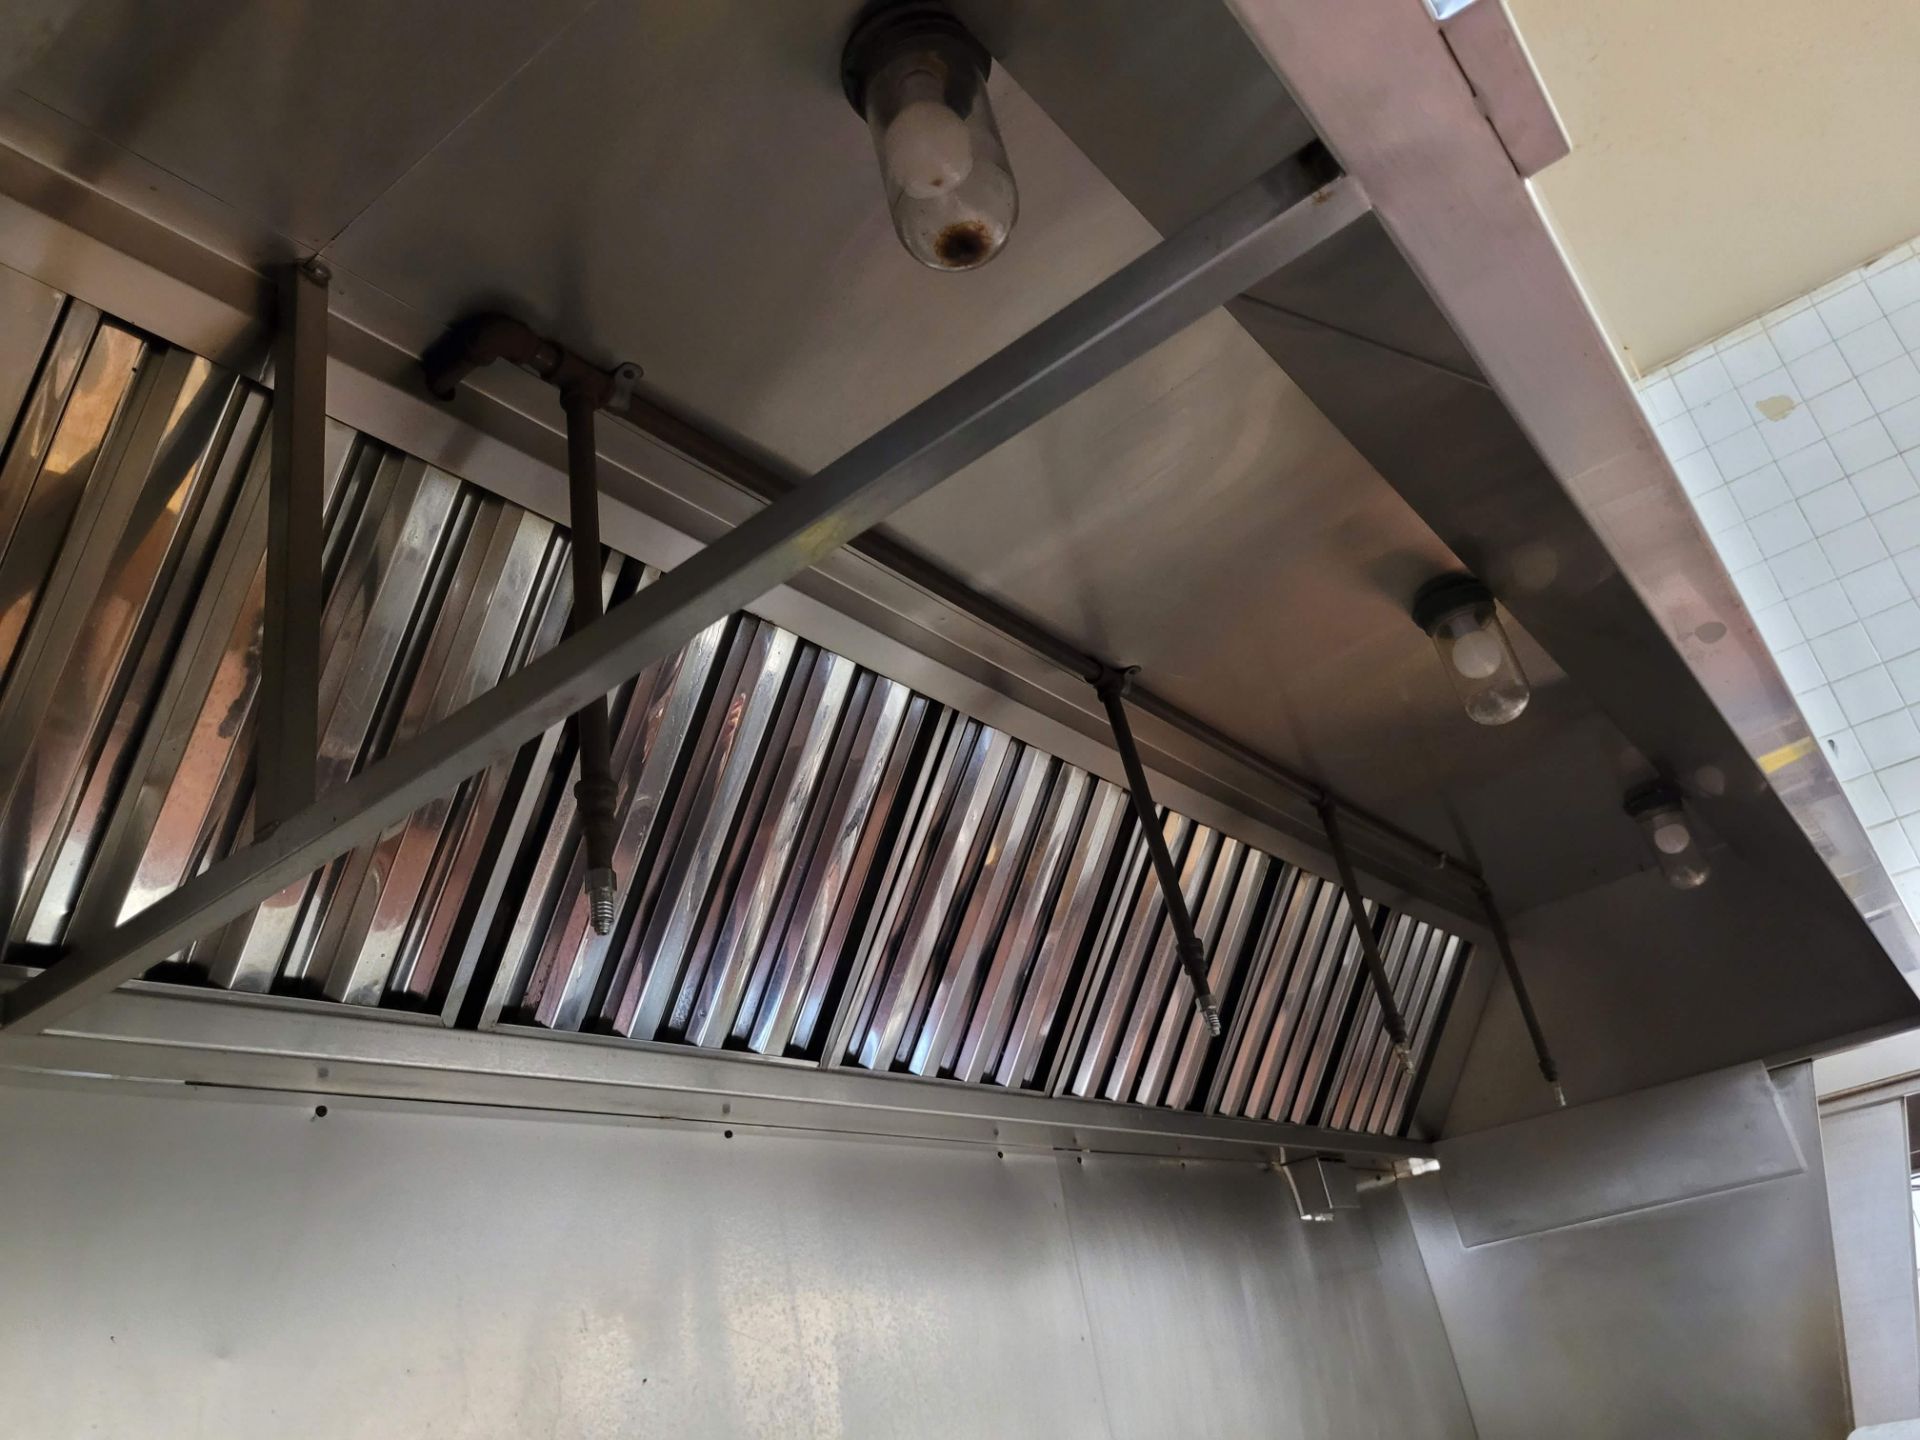 STAINLESS STEEL EXHAUST HOOD W/ FIRE SUPPRESSION, APPROX 20'L X 10'W - Image 6 of 6